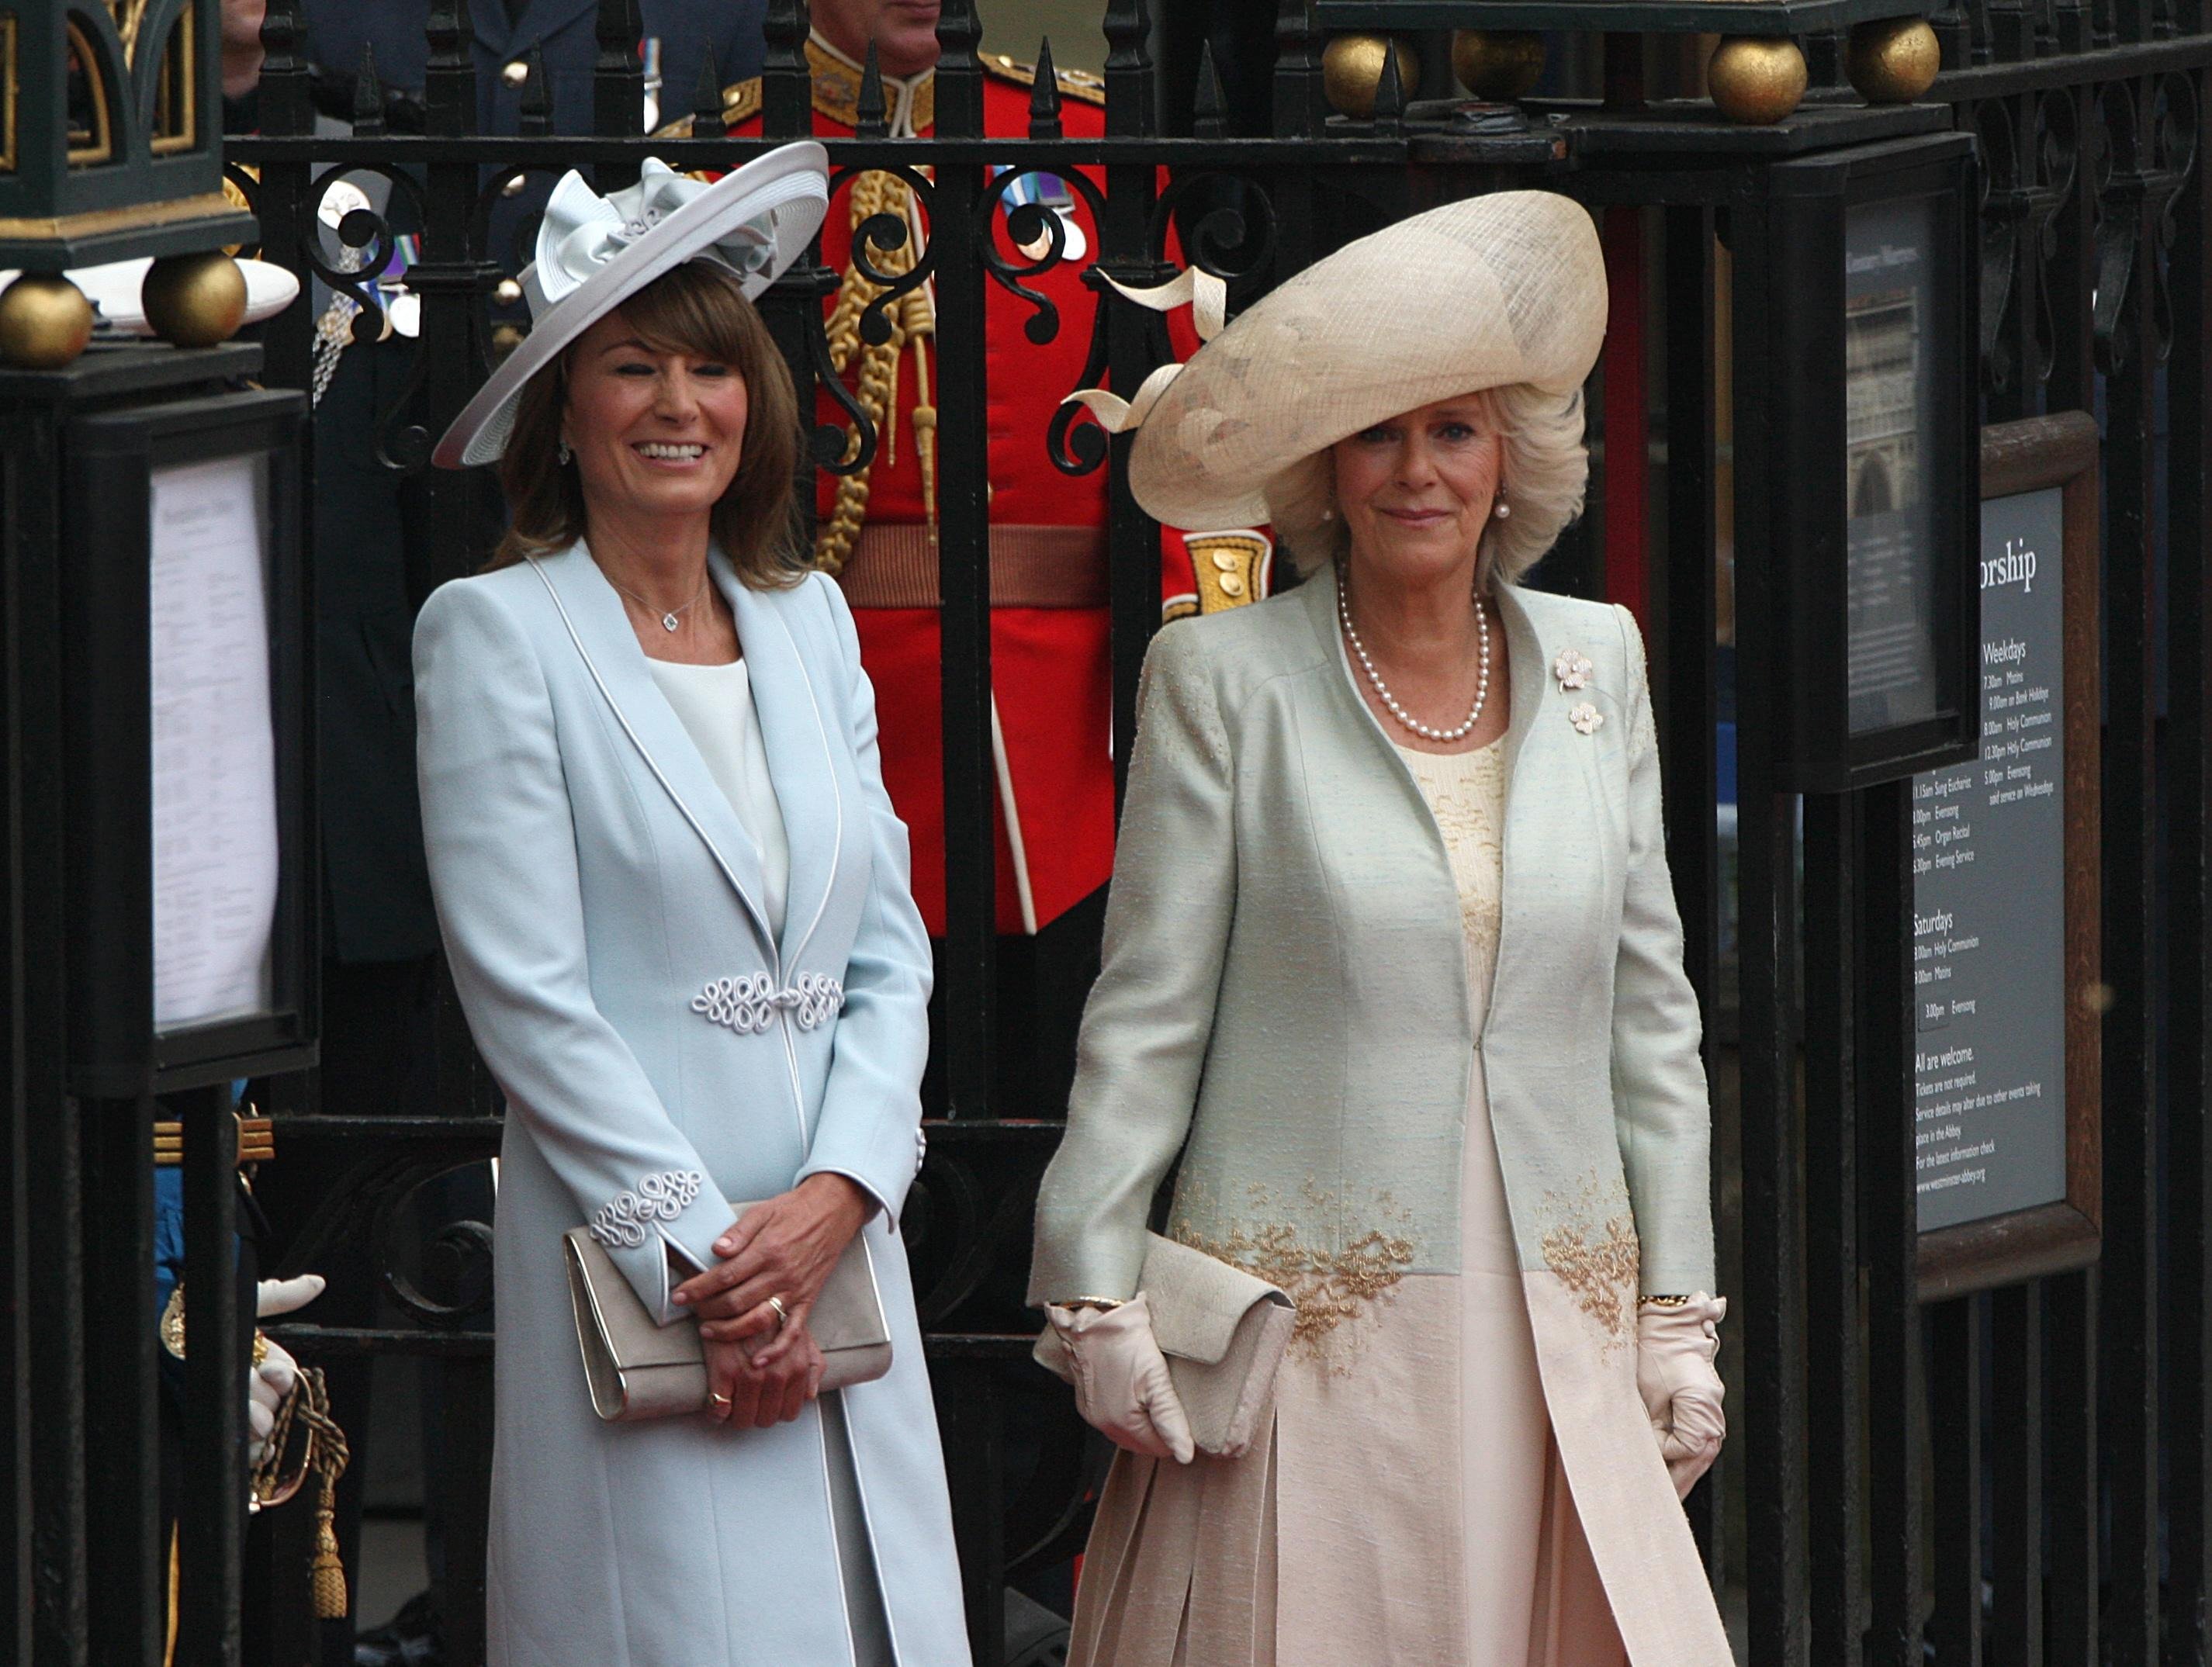 Carole Middleton and Duchess Camilla leave Westminster Abbey after the wedding between Prince William and Kate Middleton on April 29, 2011 | Source: Getty Images